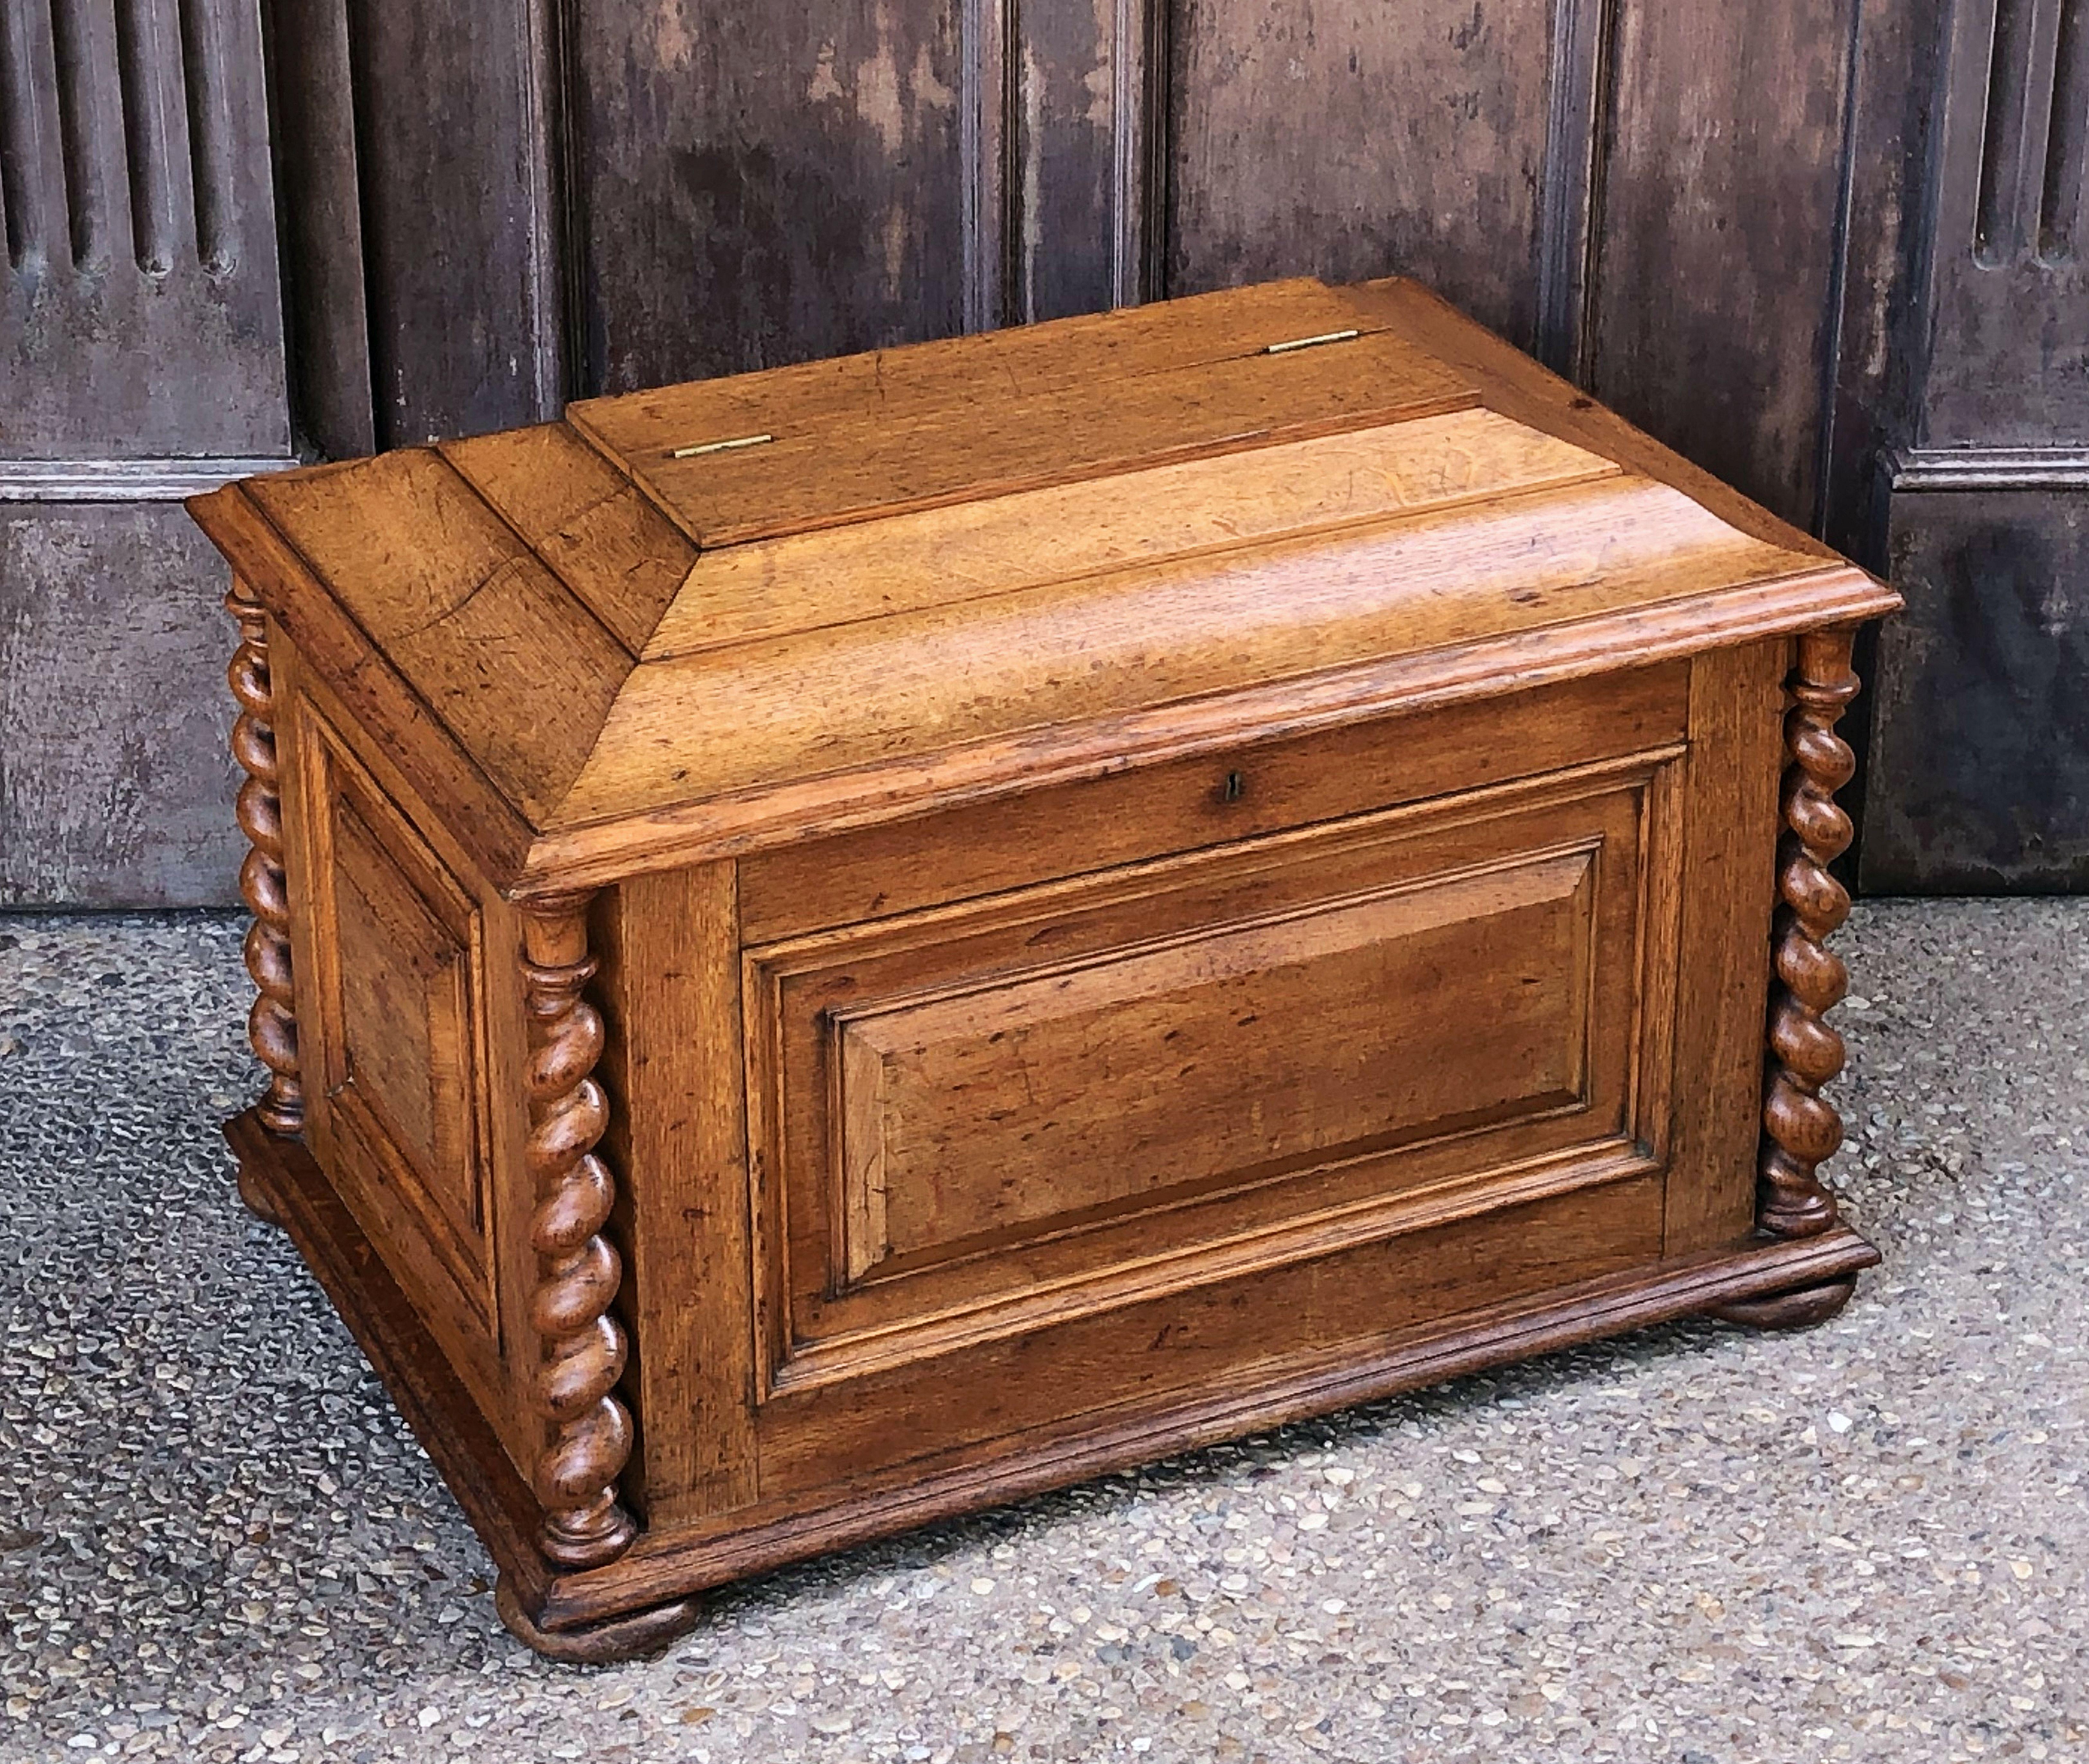 A fine large English cellaret or wine cooler compendium of patinated oak from the mid-19th century, featuring a classical sarcophagus with a hinged lid and a fitted interior with room for plenty of bottles. The exterior with turned barley twists on